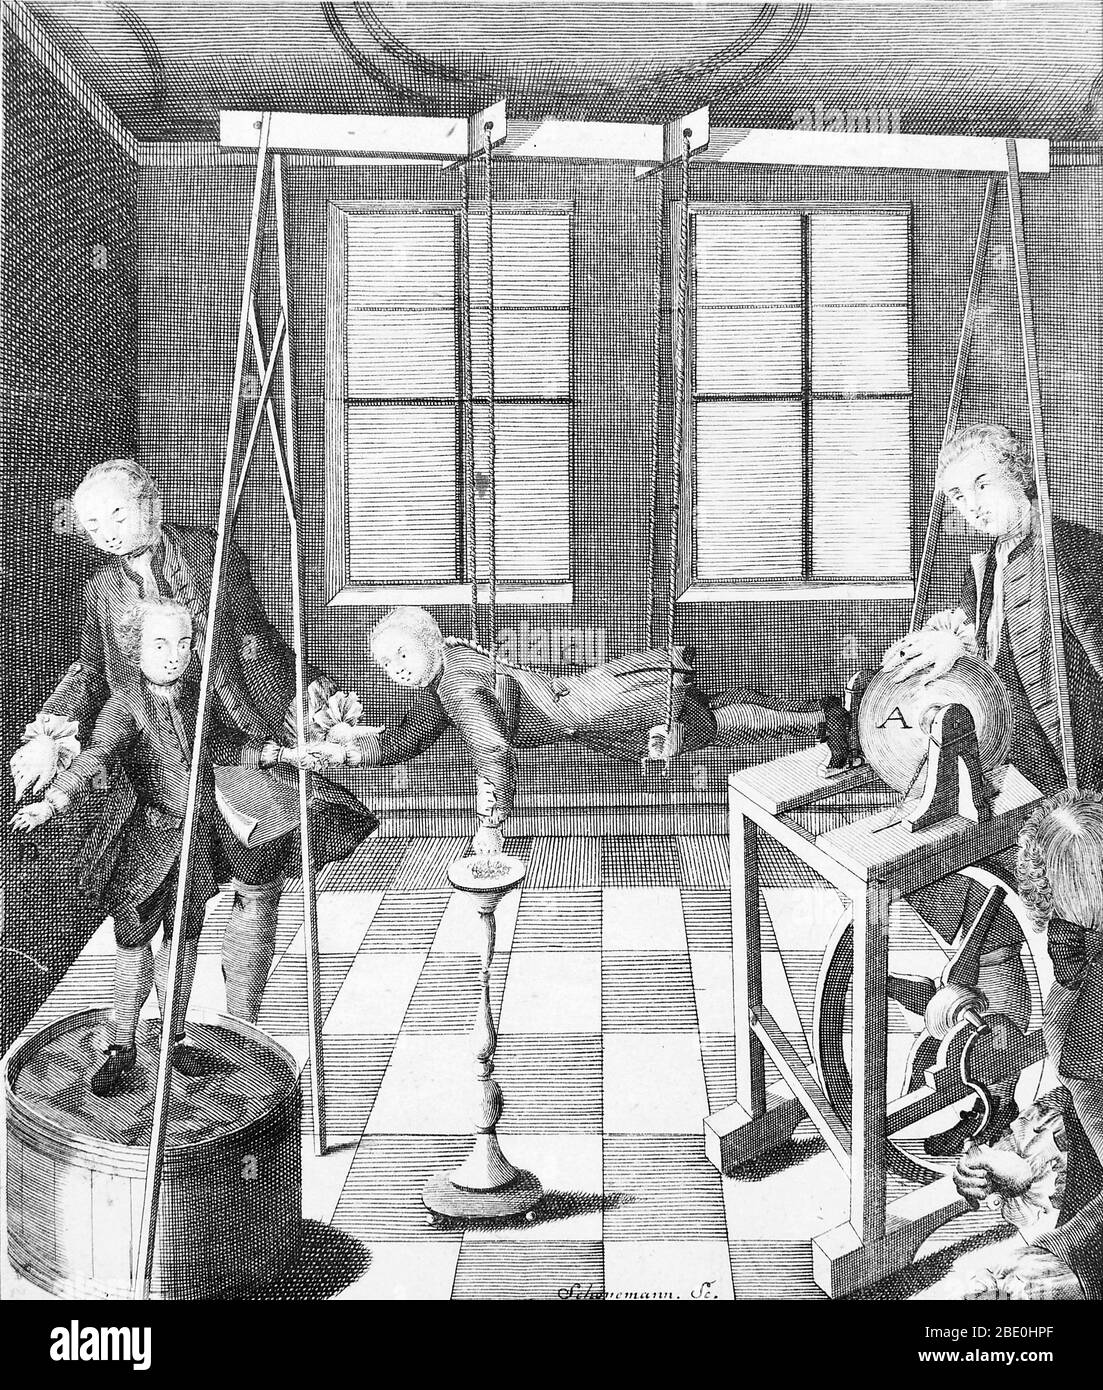 The electrical machine of Christian August Hausen, 1743. The boy suspended from silk cords is acting as a kind of prime conductor. From Hausen's 'Novi profectus in historia electricitatis.' Hausen (1693-1743) was a German mathematician who is known for his research on electricity, in particular using a triboelectric generator. Hausen's generator was similar to earlier generators, such as that of Francis Hauksbee. It consisted of a glass globe rotated by a cord and a large wheel. An assistant rubbed the globe with his hand to produce static electricity. Hausen's book describes his generator and Stock Photo